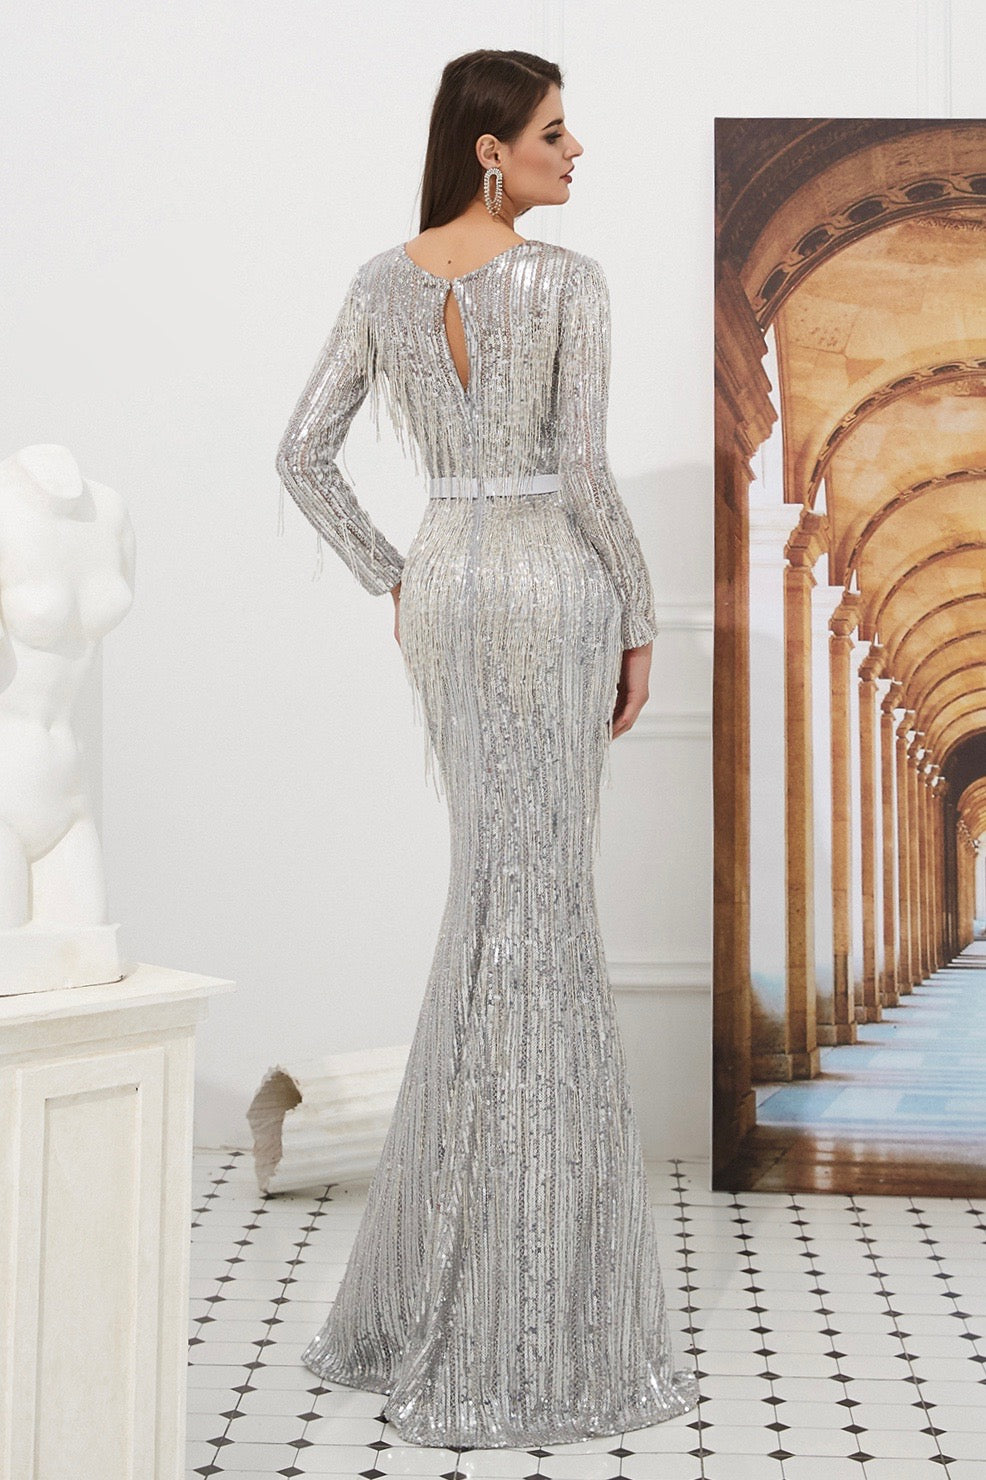 LOLA Silver Heavy Beaded Mesh Insert Long Sleeve Formal Gown Dress Private Label$ AfterPay Humm ZipPay LayBuy Sezzle